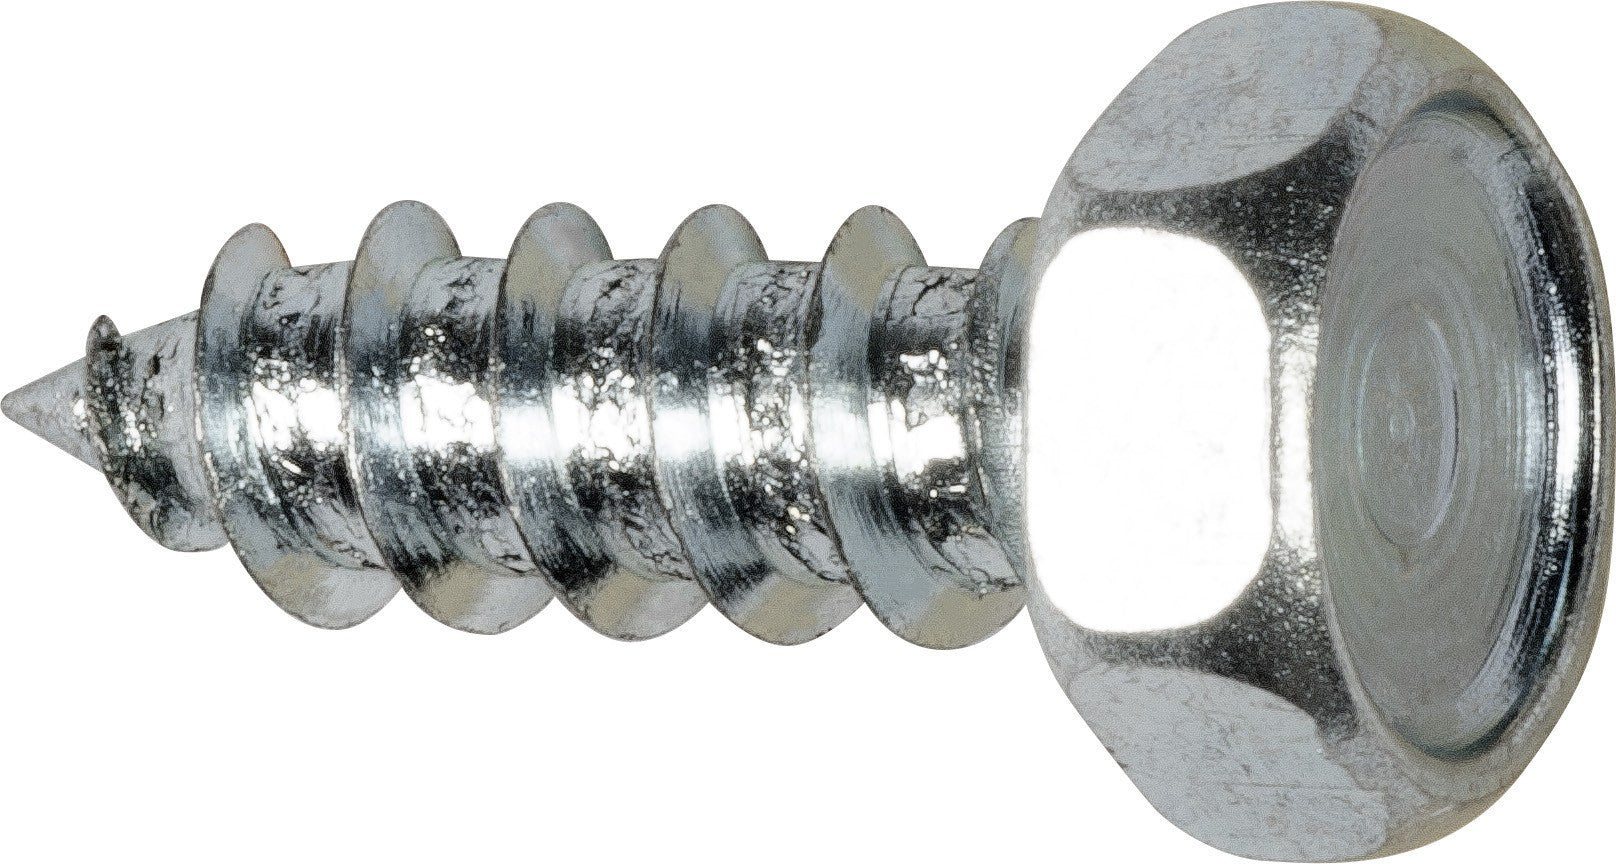 Auveco 1781 14 X 3/4 Indented Hex Head Tapping Screw 3/8 Hex Size Zinc Qty 100 